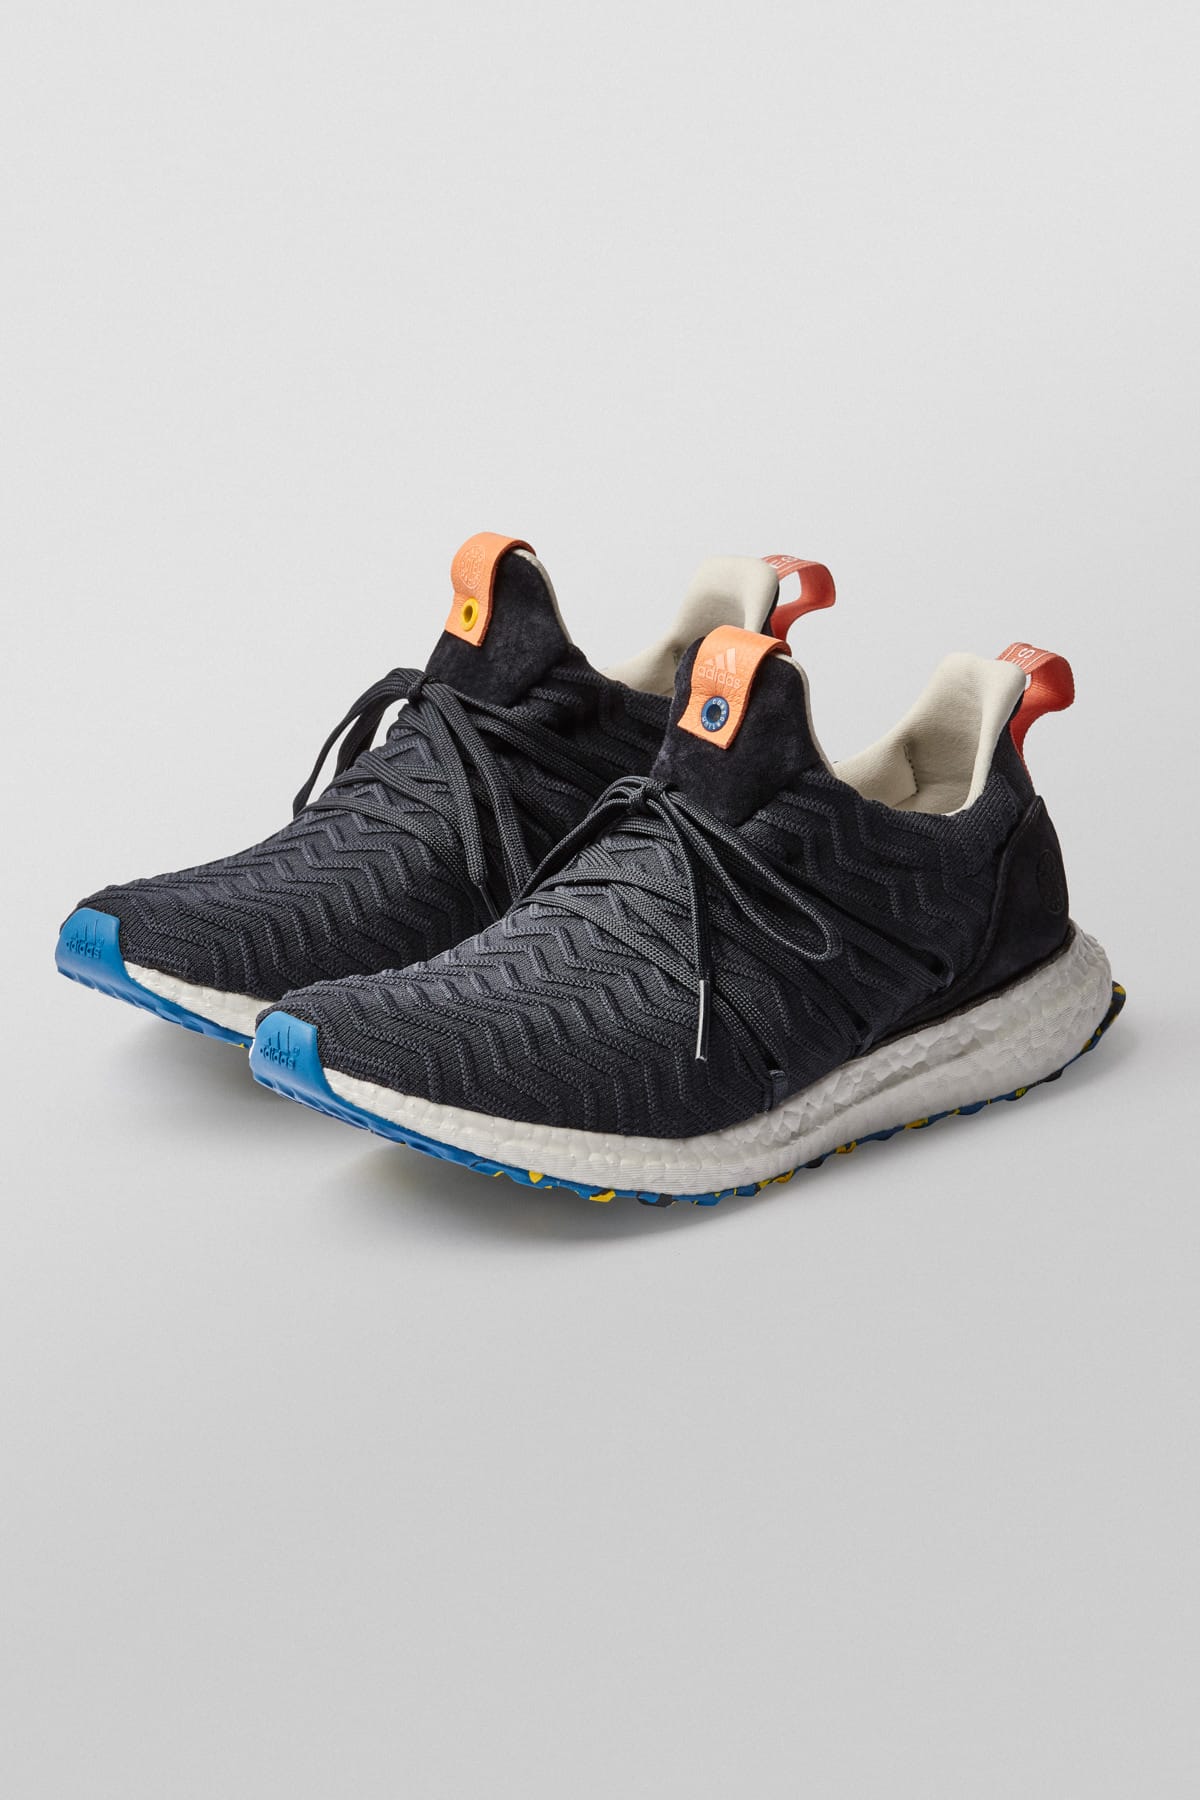 adidas ultra boost a kind of guise